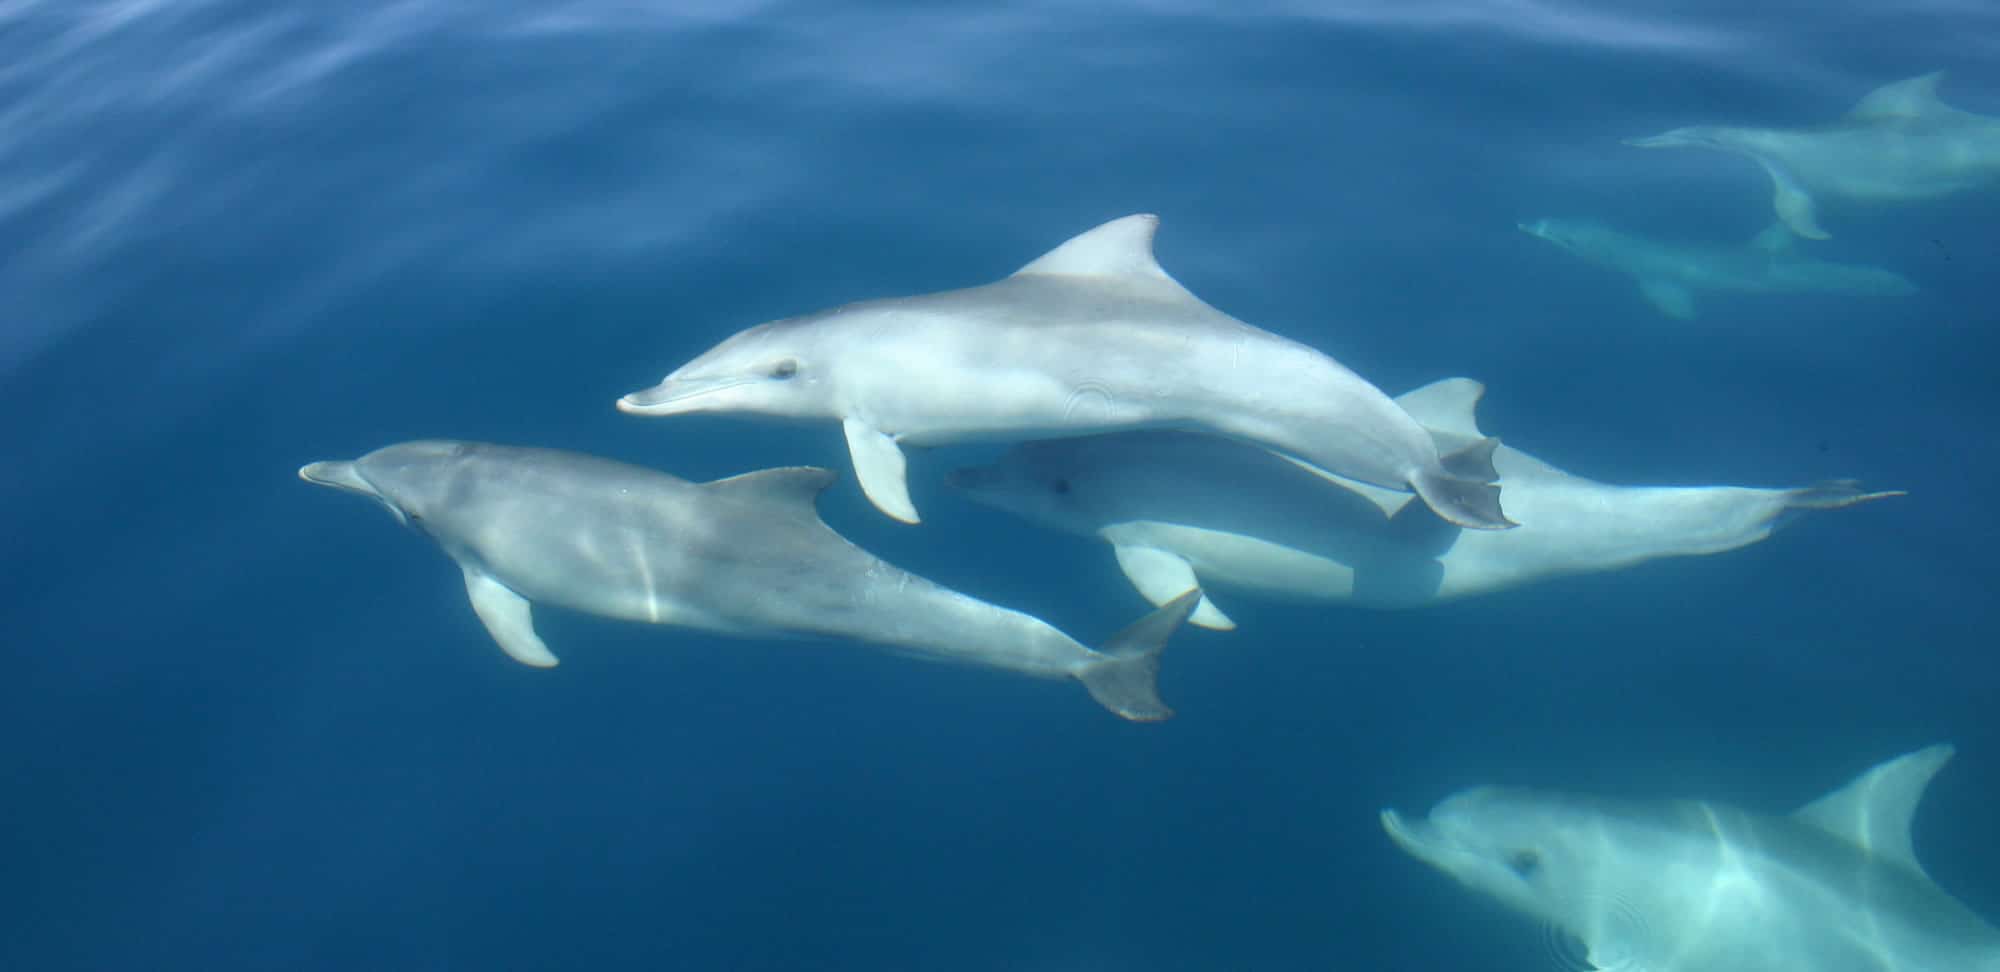 There are 38 species of dolphins that live in the ocean.